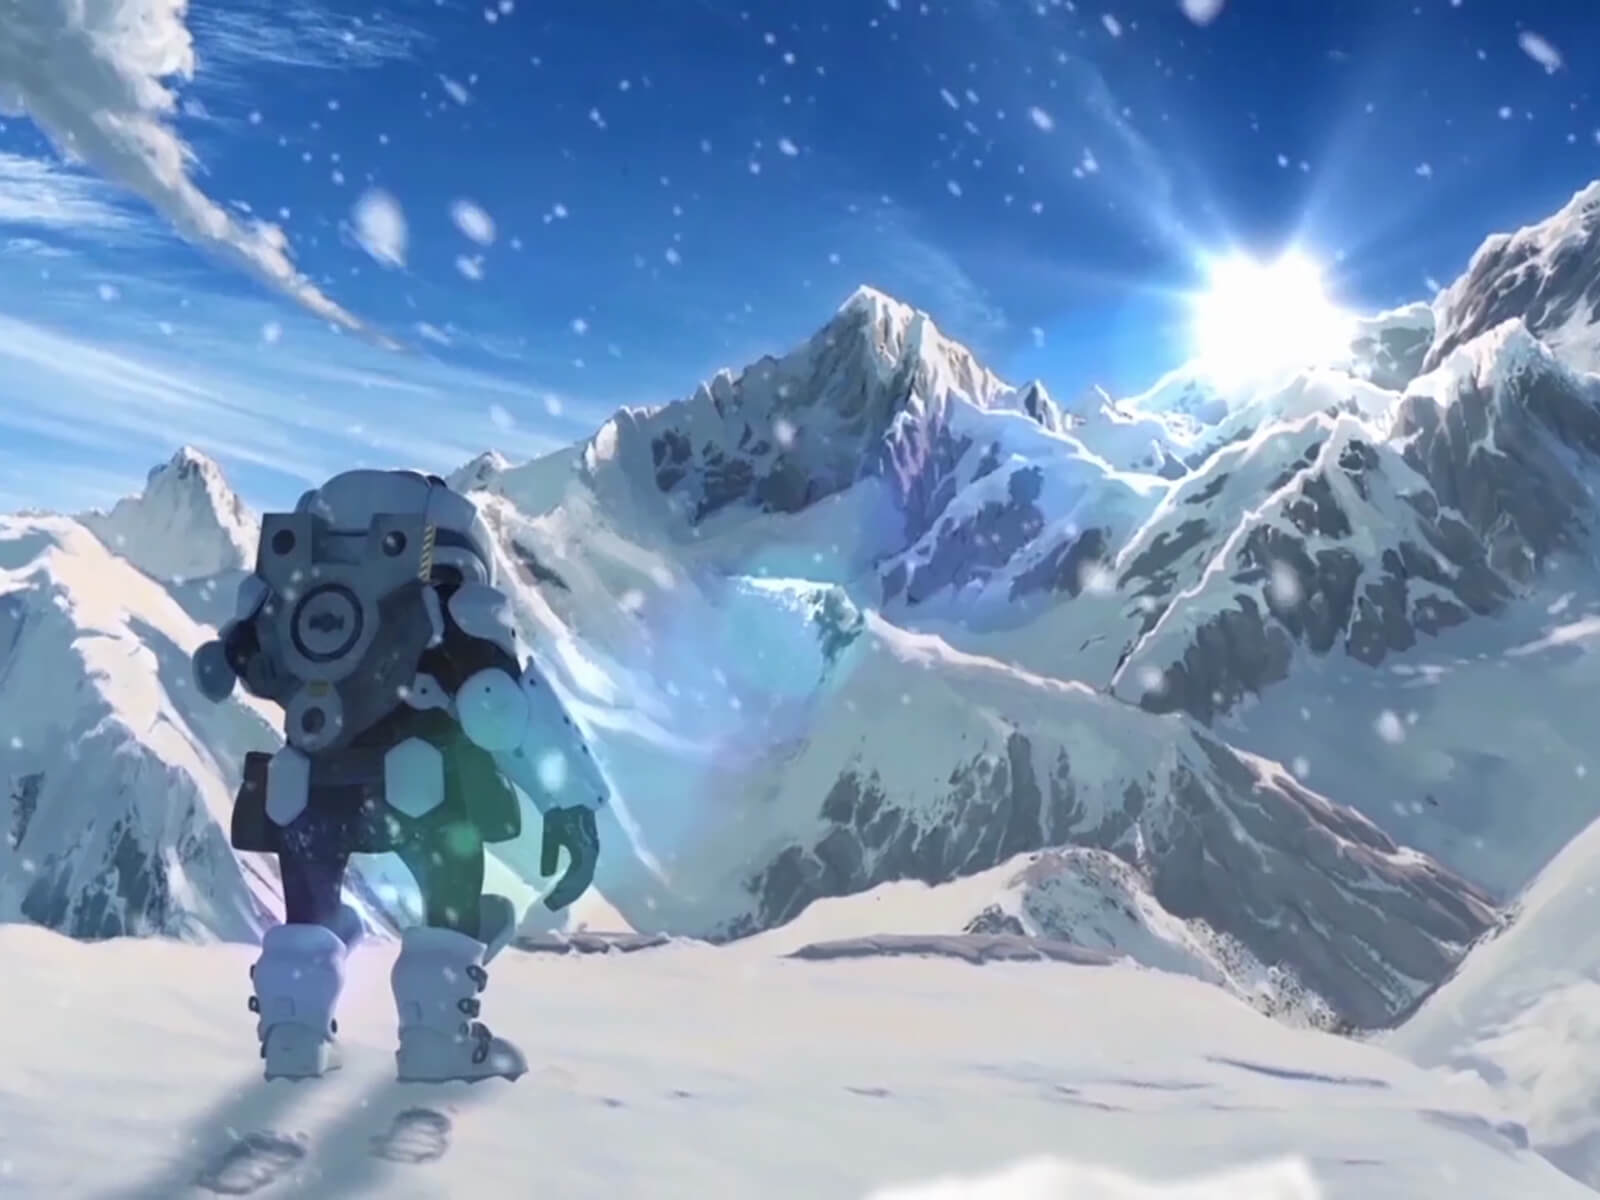 Screenshot from student film Level 1457 LAST of the main character gazing at snowy mountains